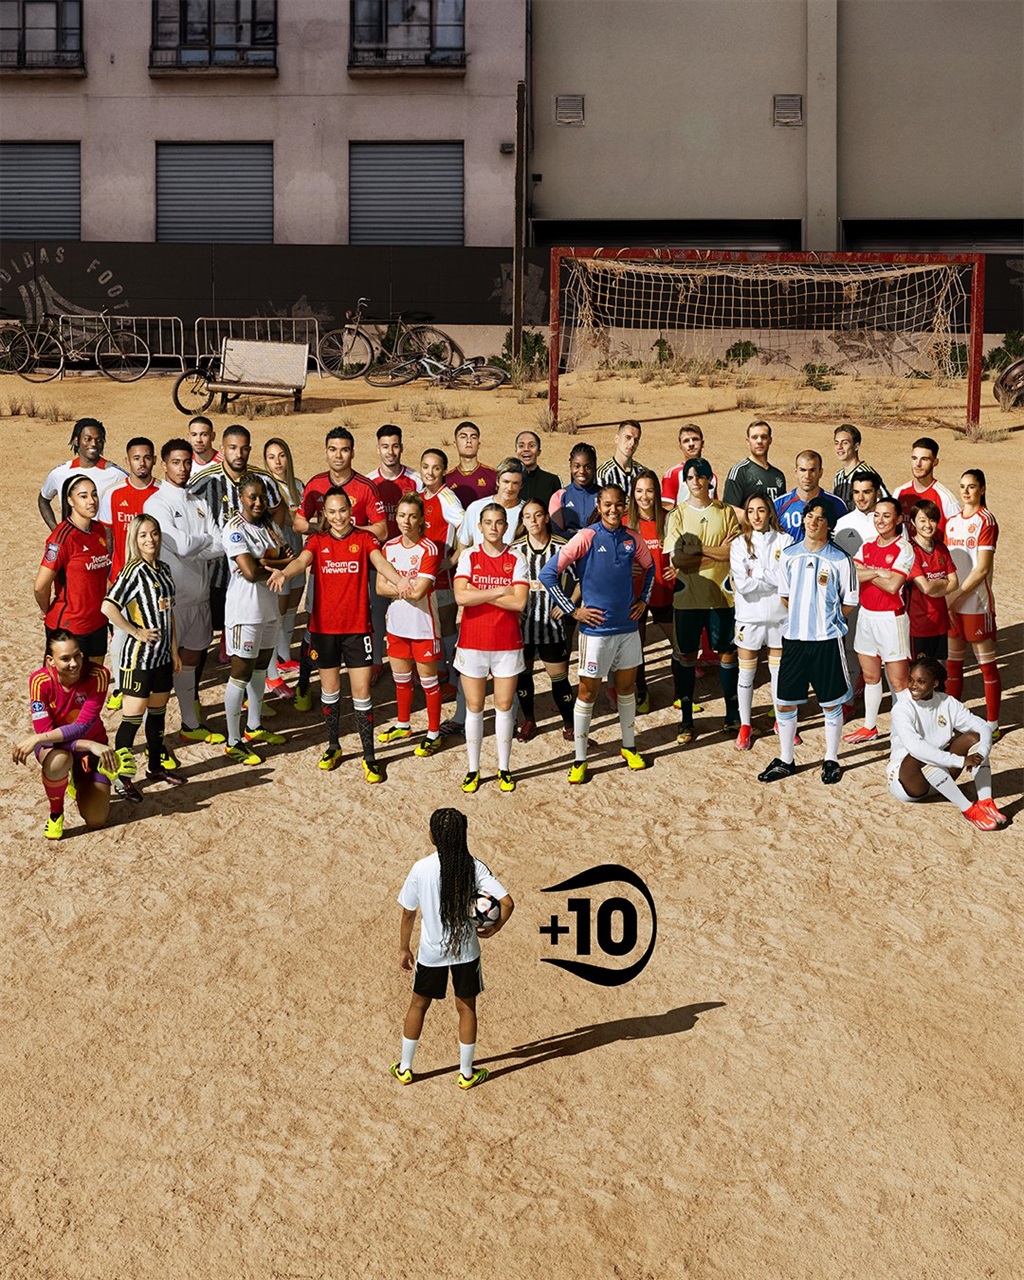 Adidas have launched a new campaign aimed at keeping young girls in football.